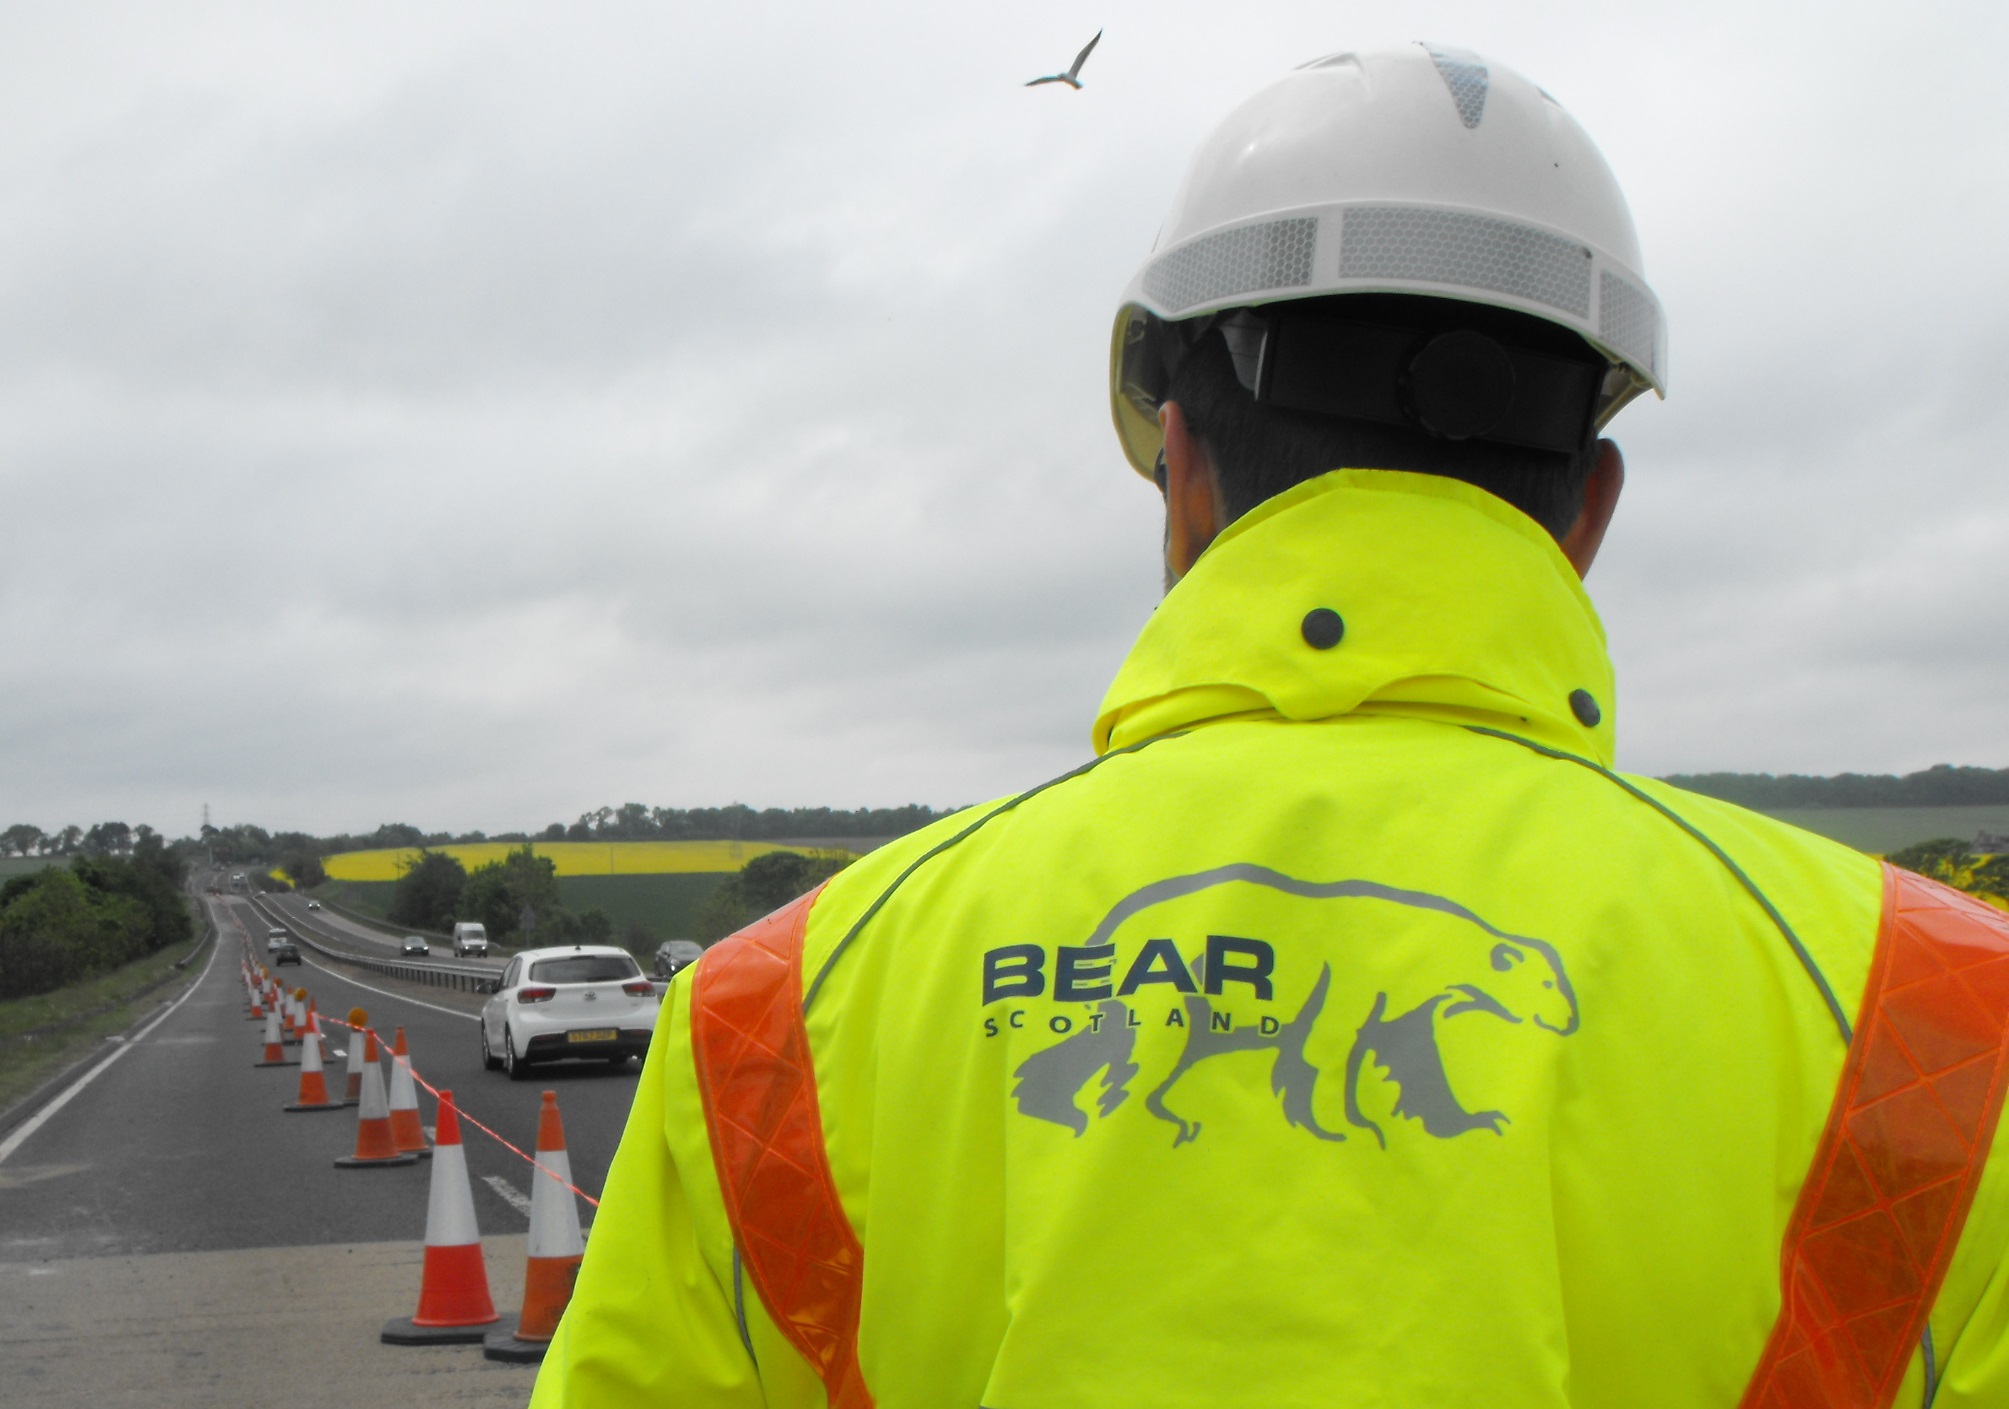 WEEKEND RESURFACING WORKS ON THE M9 SOUTHBOUND, JUNCTION 9 TO 8